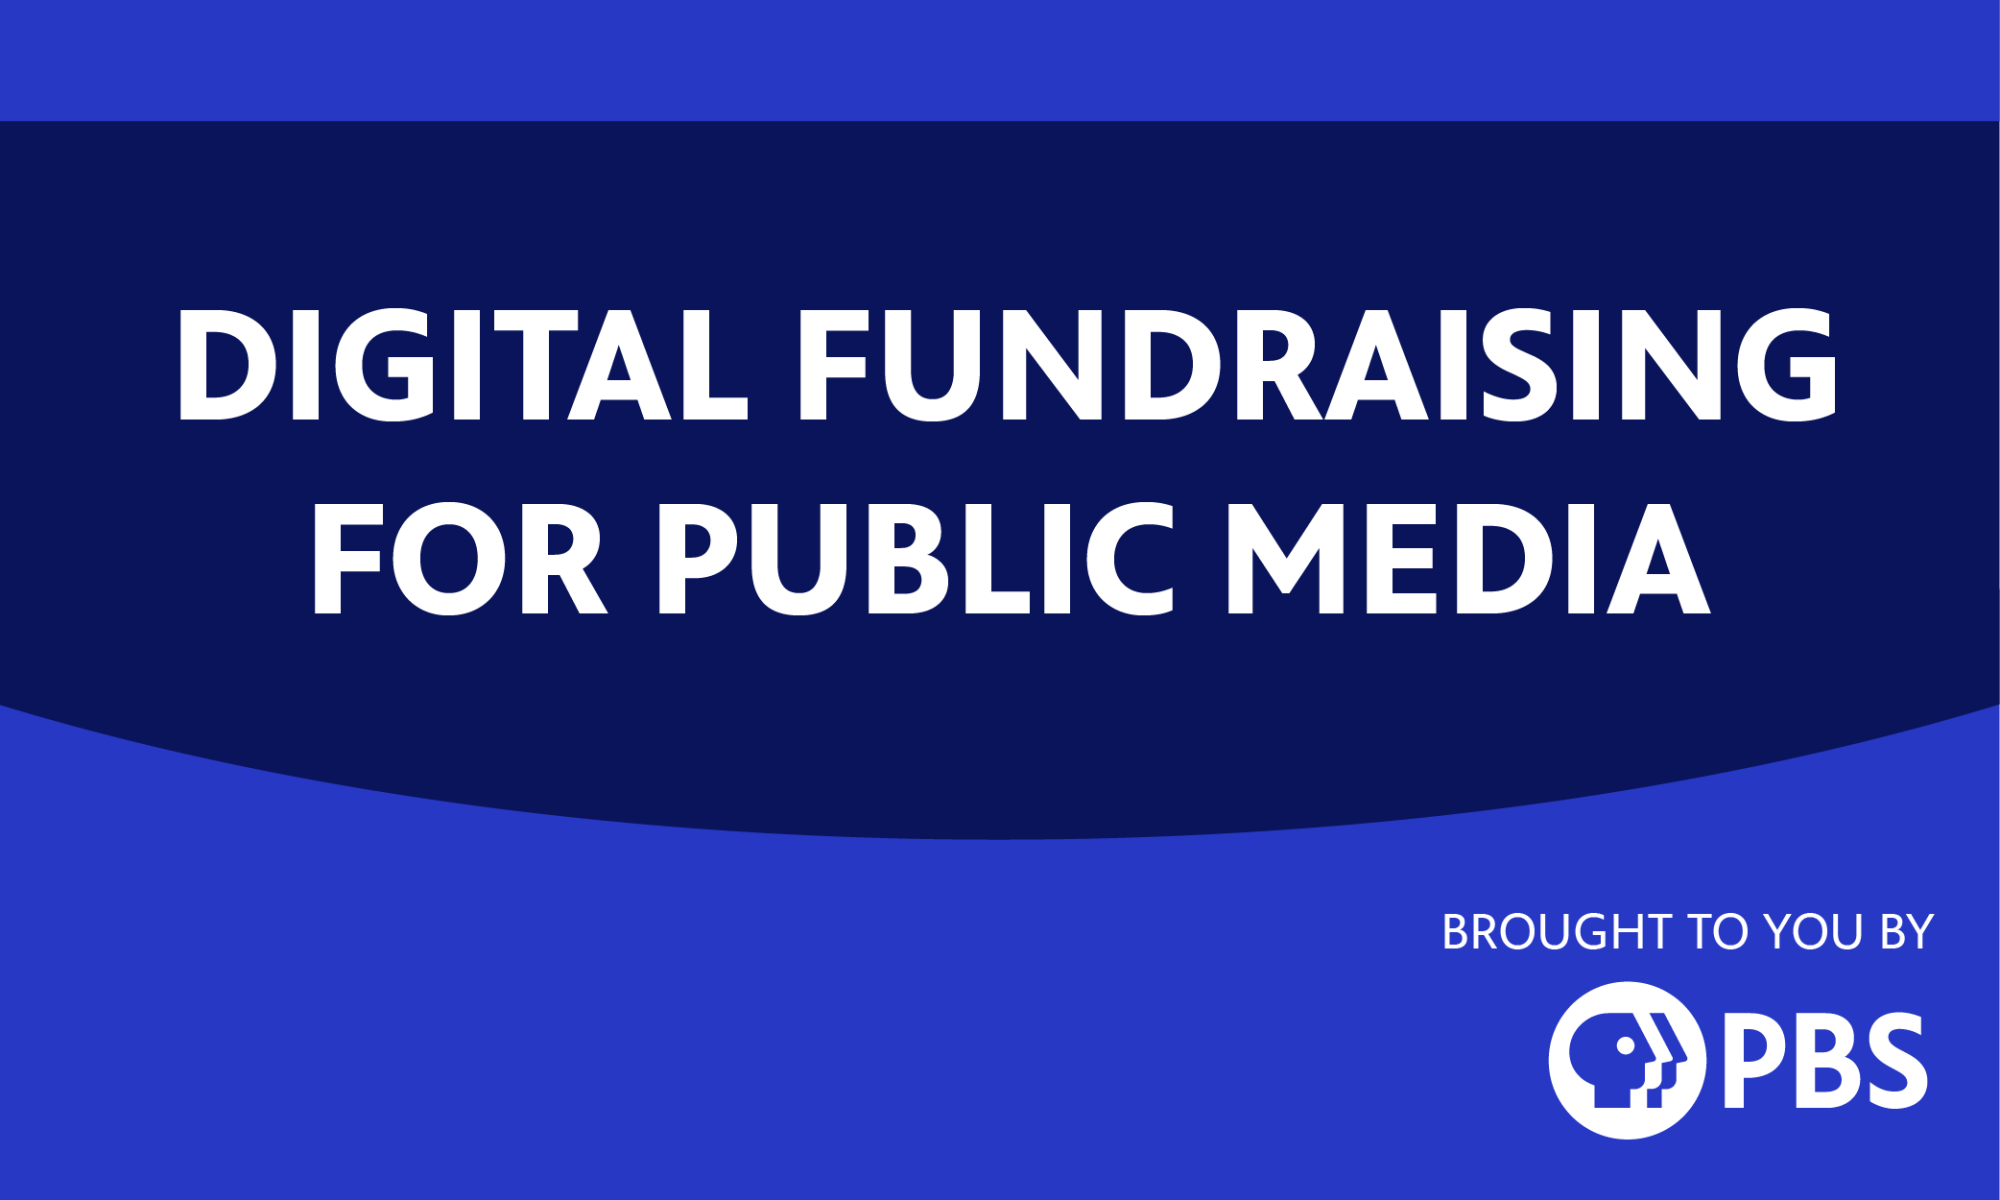 Digital Fundraising for Public Media. Brought to you by PBS.